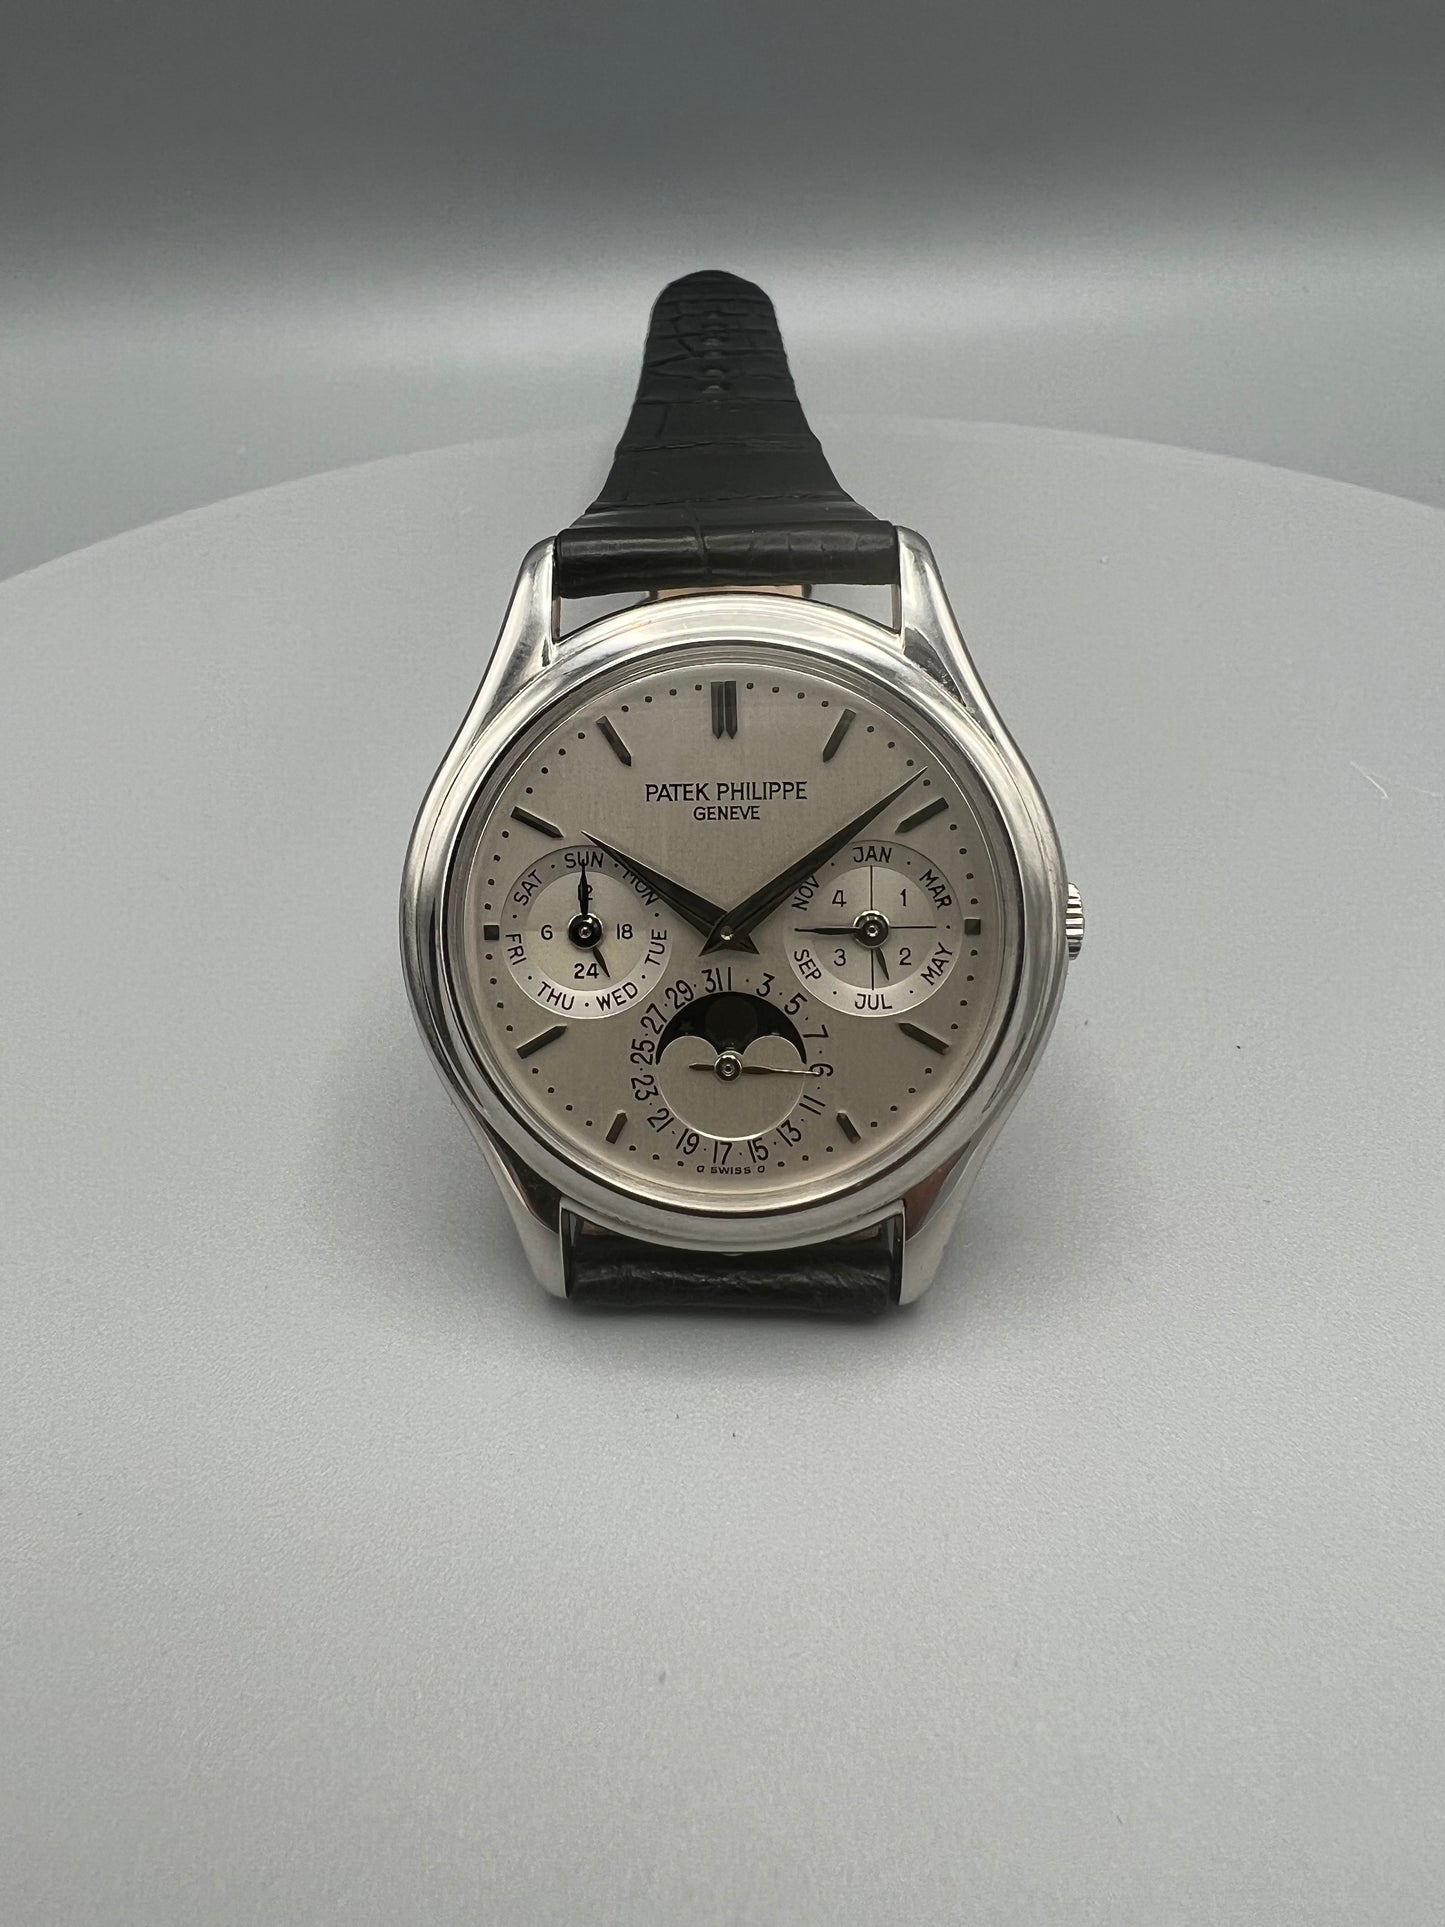 Patek Philippe Ref 3940P Rare Iconic Watch, Excellent Condition Archival Extract 1999